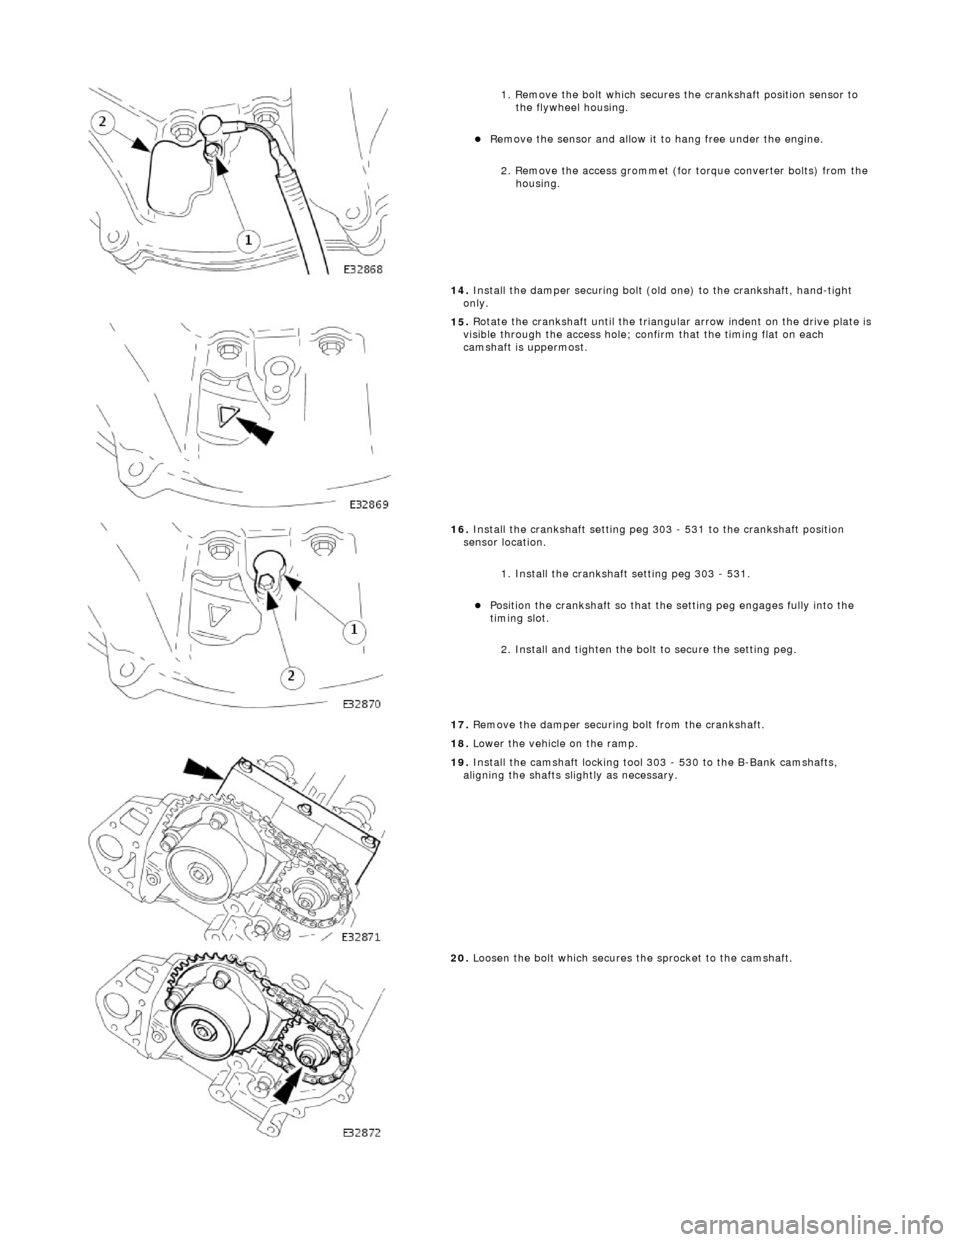 JAGUAR X308 1998 2.G Workshop Manual  
1
. Remove the bolt which secures the crankshaft position sensor to 
the flywheel housing. 
R
 emove the sensor and allow it to hang free under the engine.  
2. Remove the access grommet (for tor